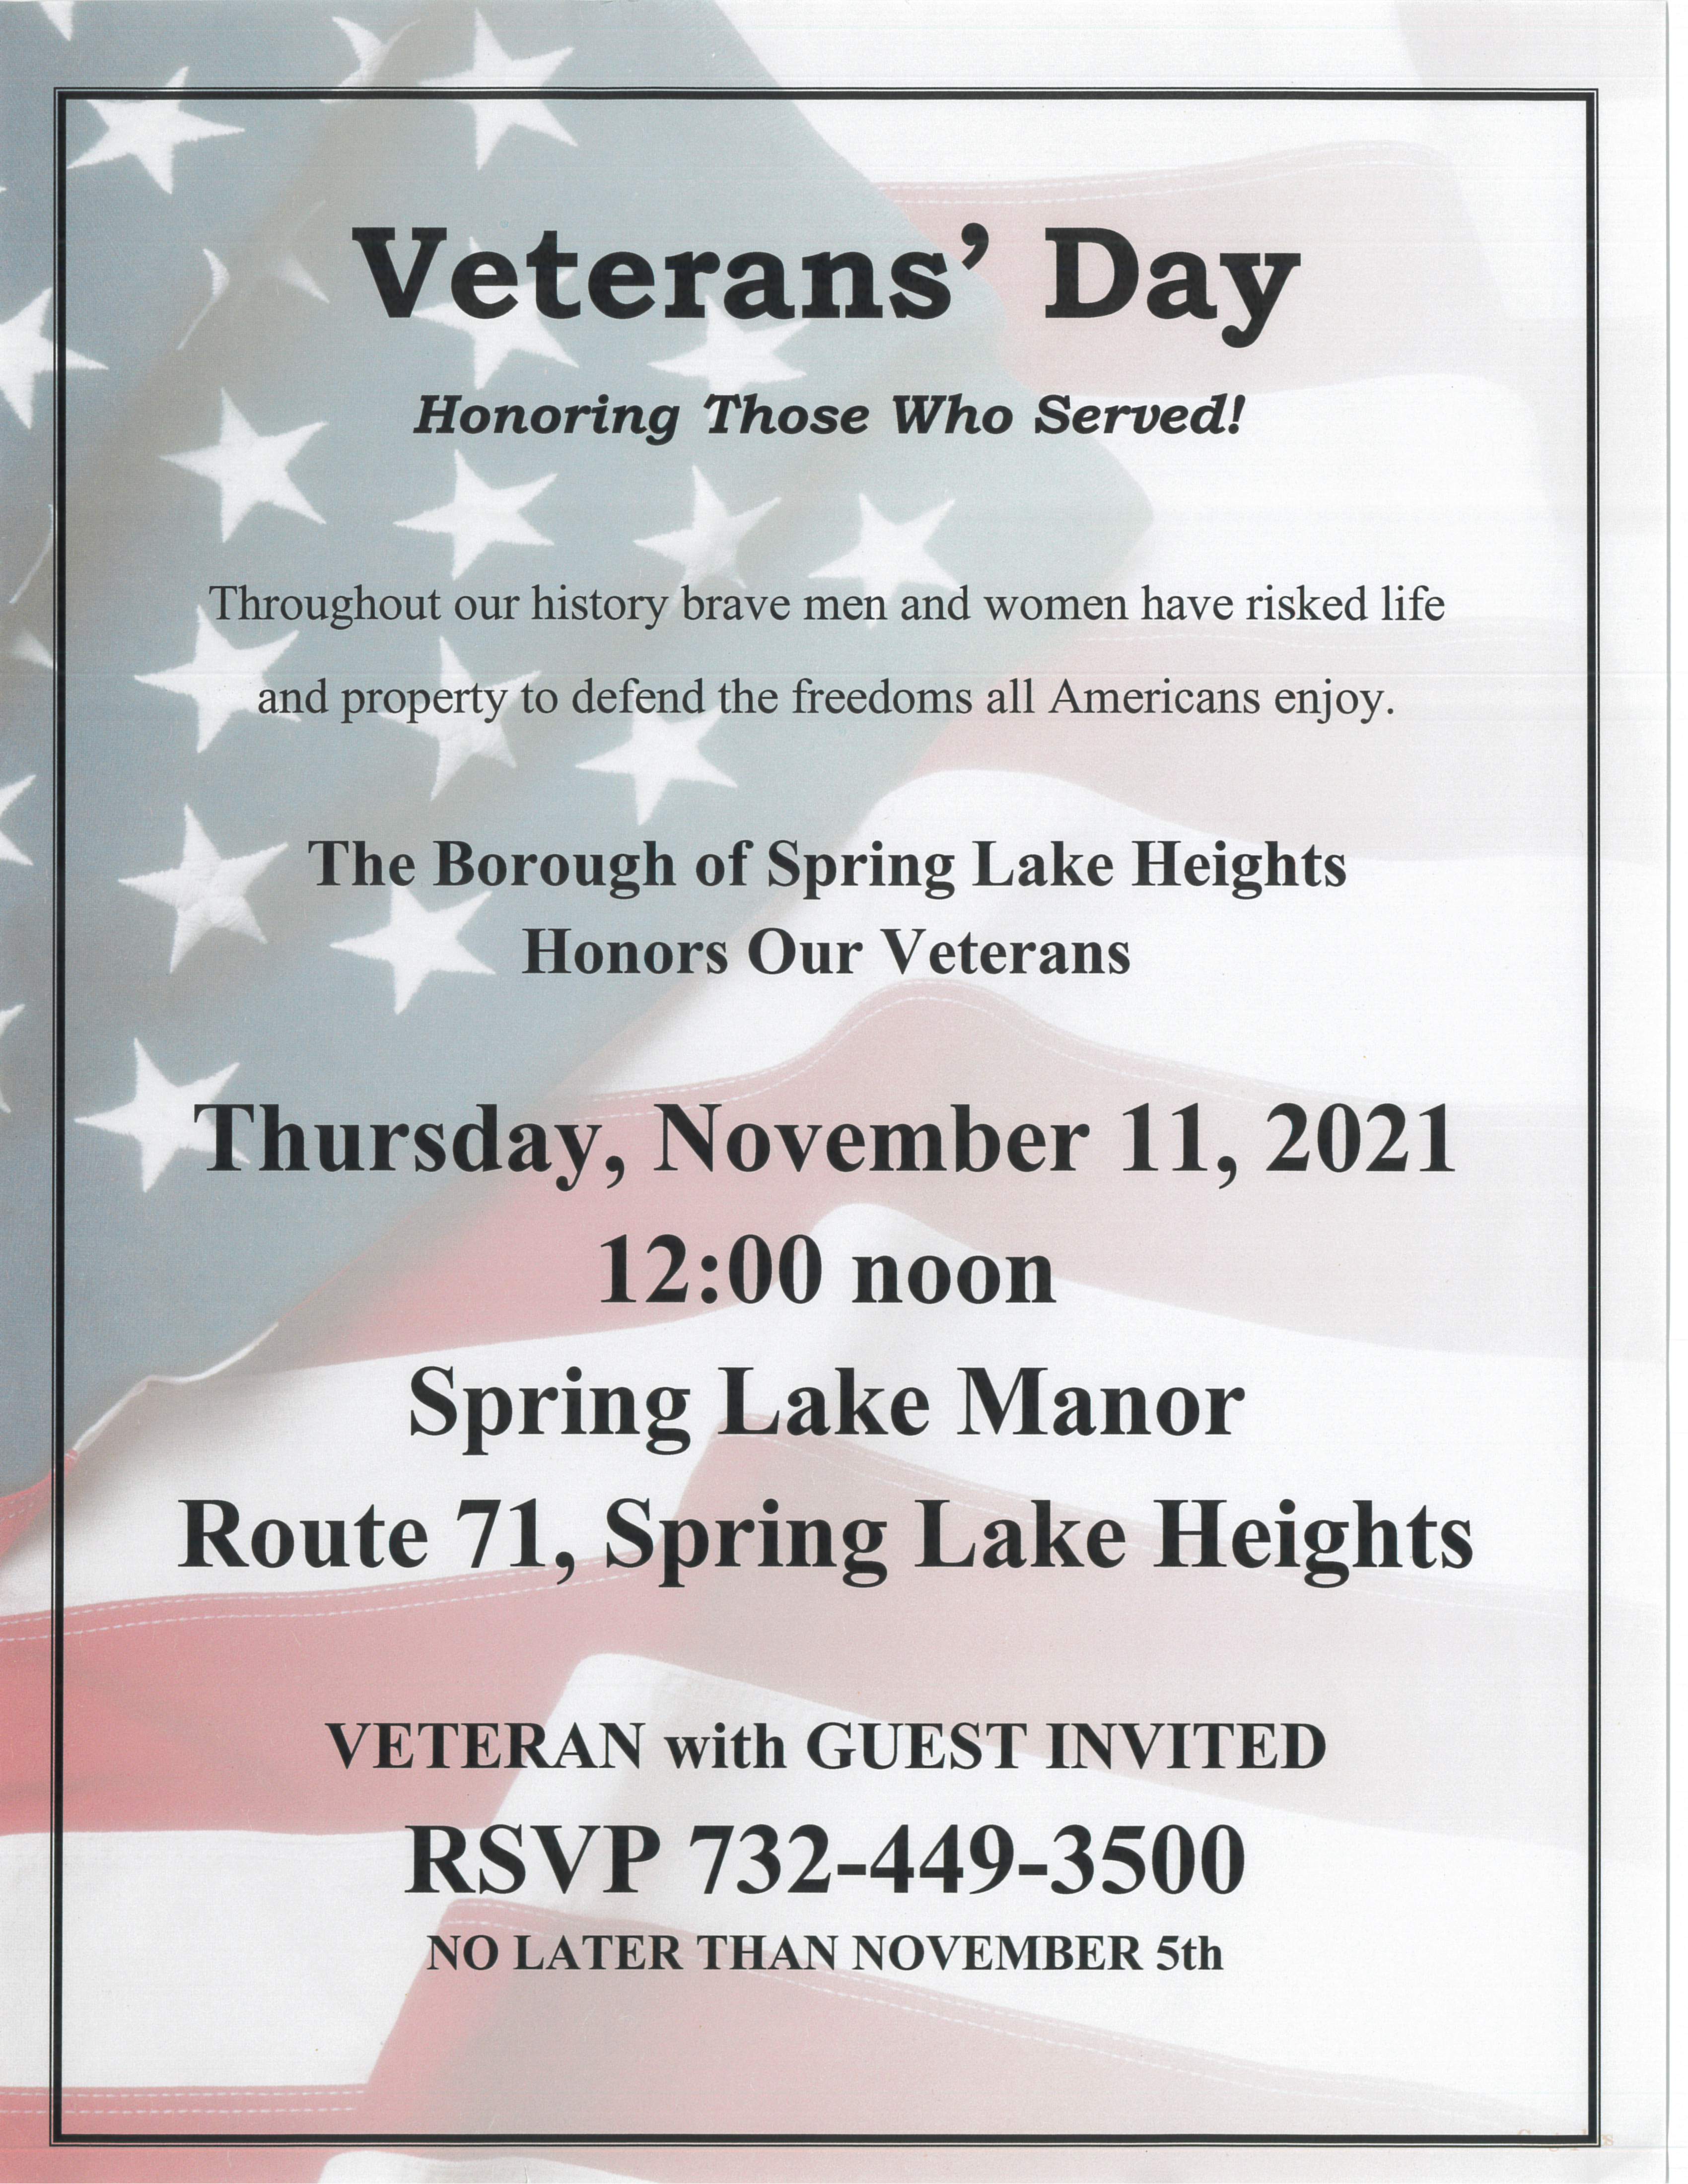 veterans-day-lunch-invitation-spring-lake-heights-new-jersey